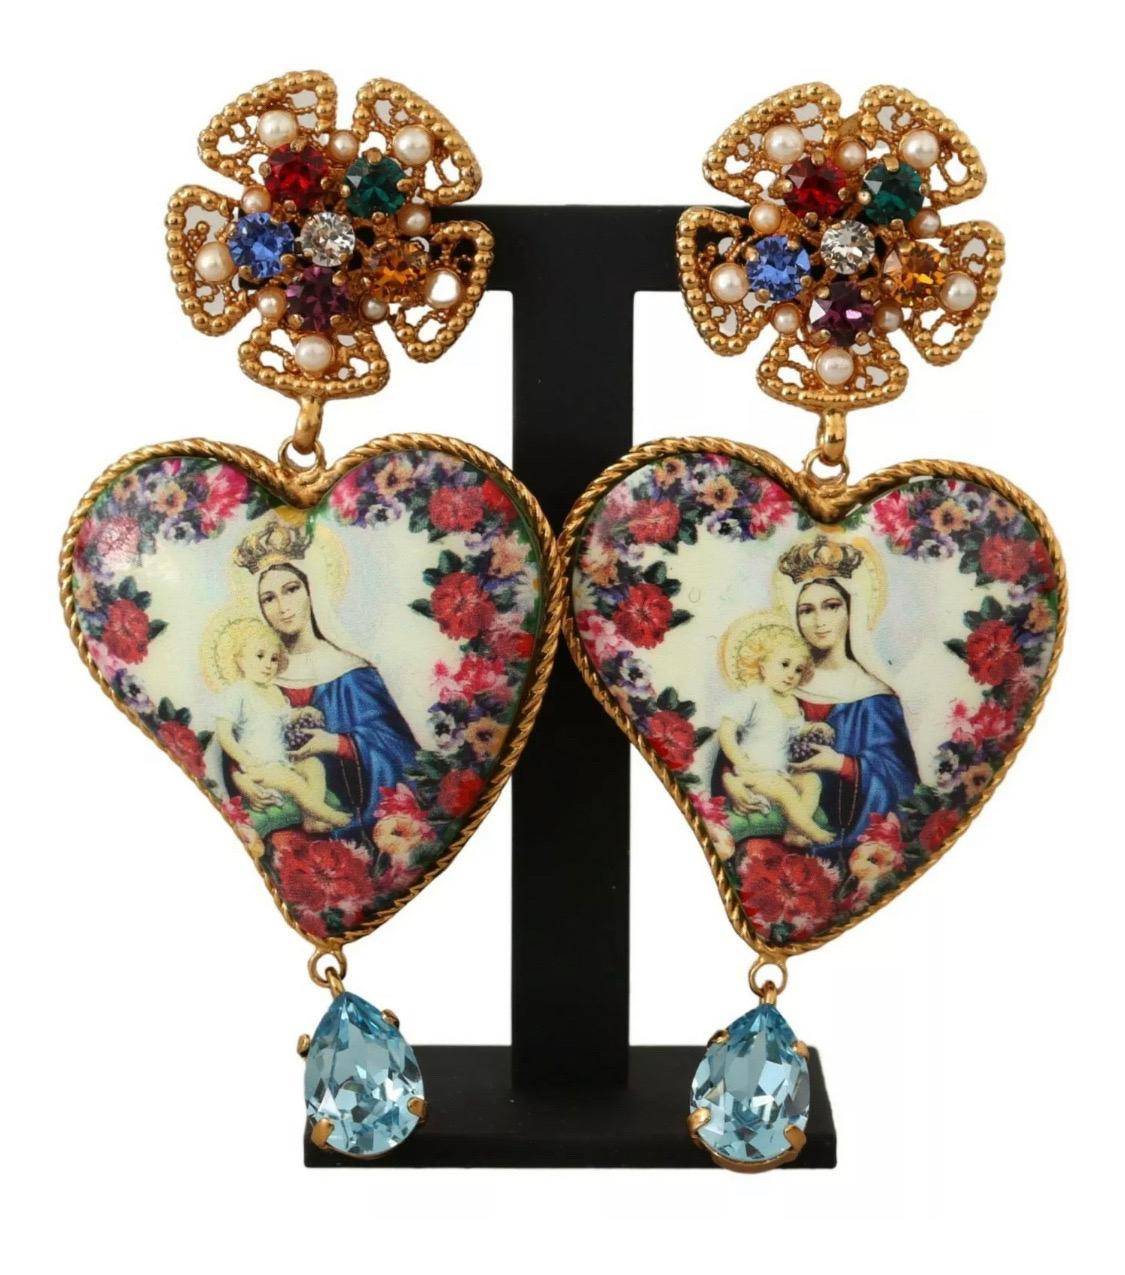 DOLCE & GABBANA

Gorgeous brand new with tags, 100% Authentic Dolce & Gabbana earrings.

Model: Clip-on, dangling
Motive: Sicily Heart Maria
Material: 40% Brass, 5% Plastic, 15% Glass, 40% Resin
Color: Gold with multicolor crystals
Logo details
Made